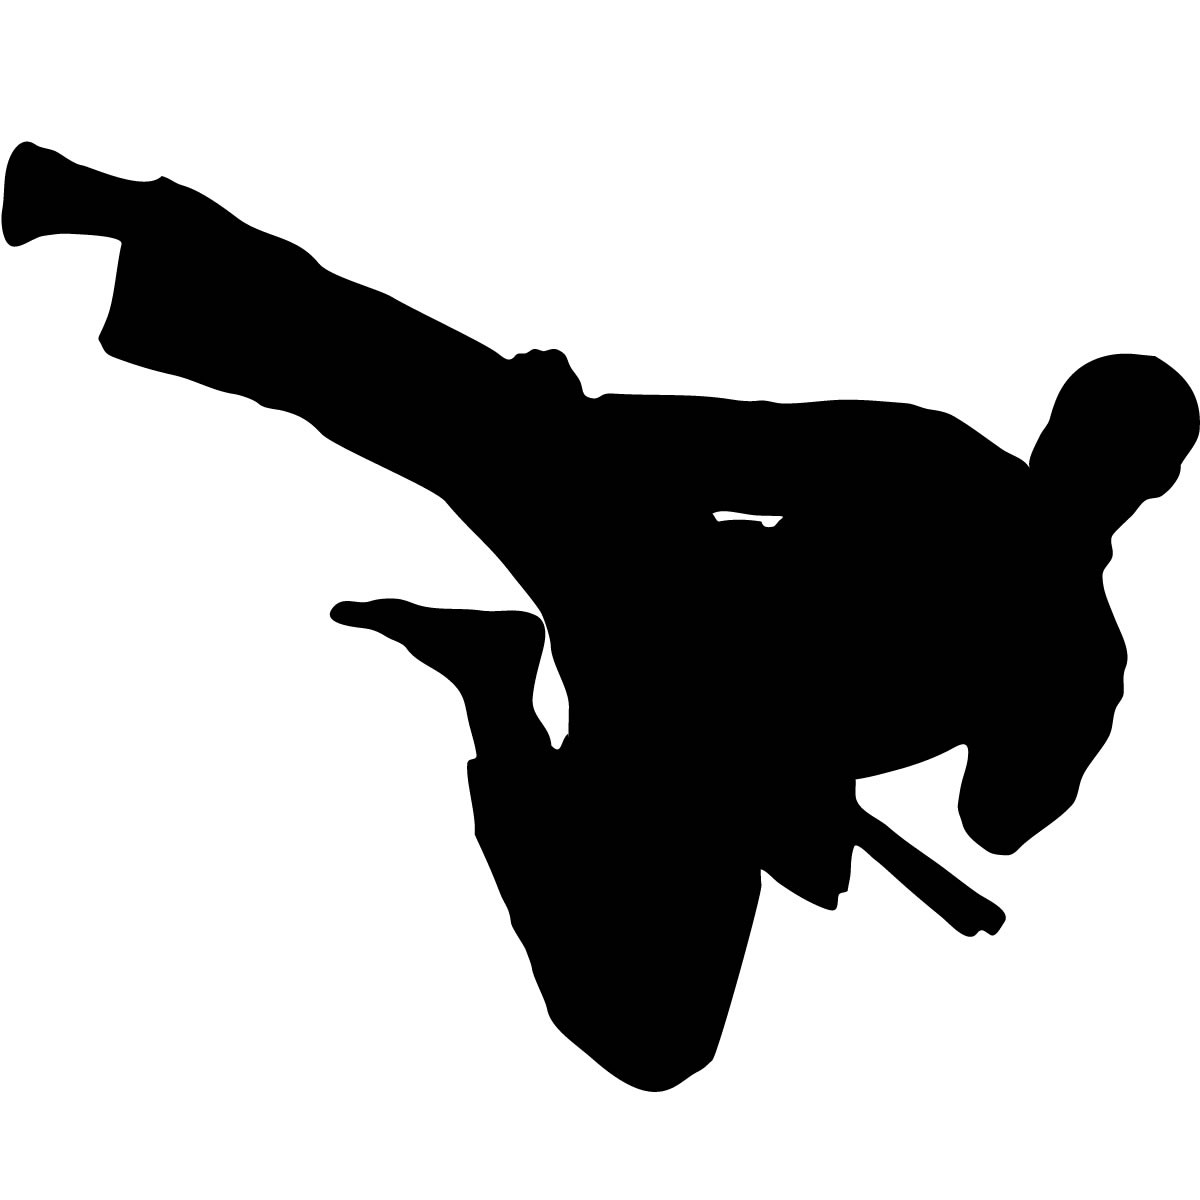 Ninja Kick Clipart Images Pictures Becuo | Stopimage